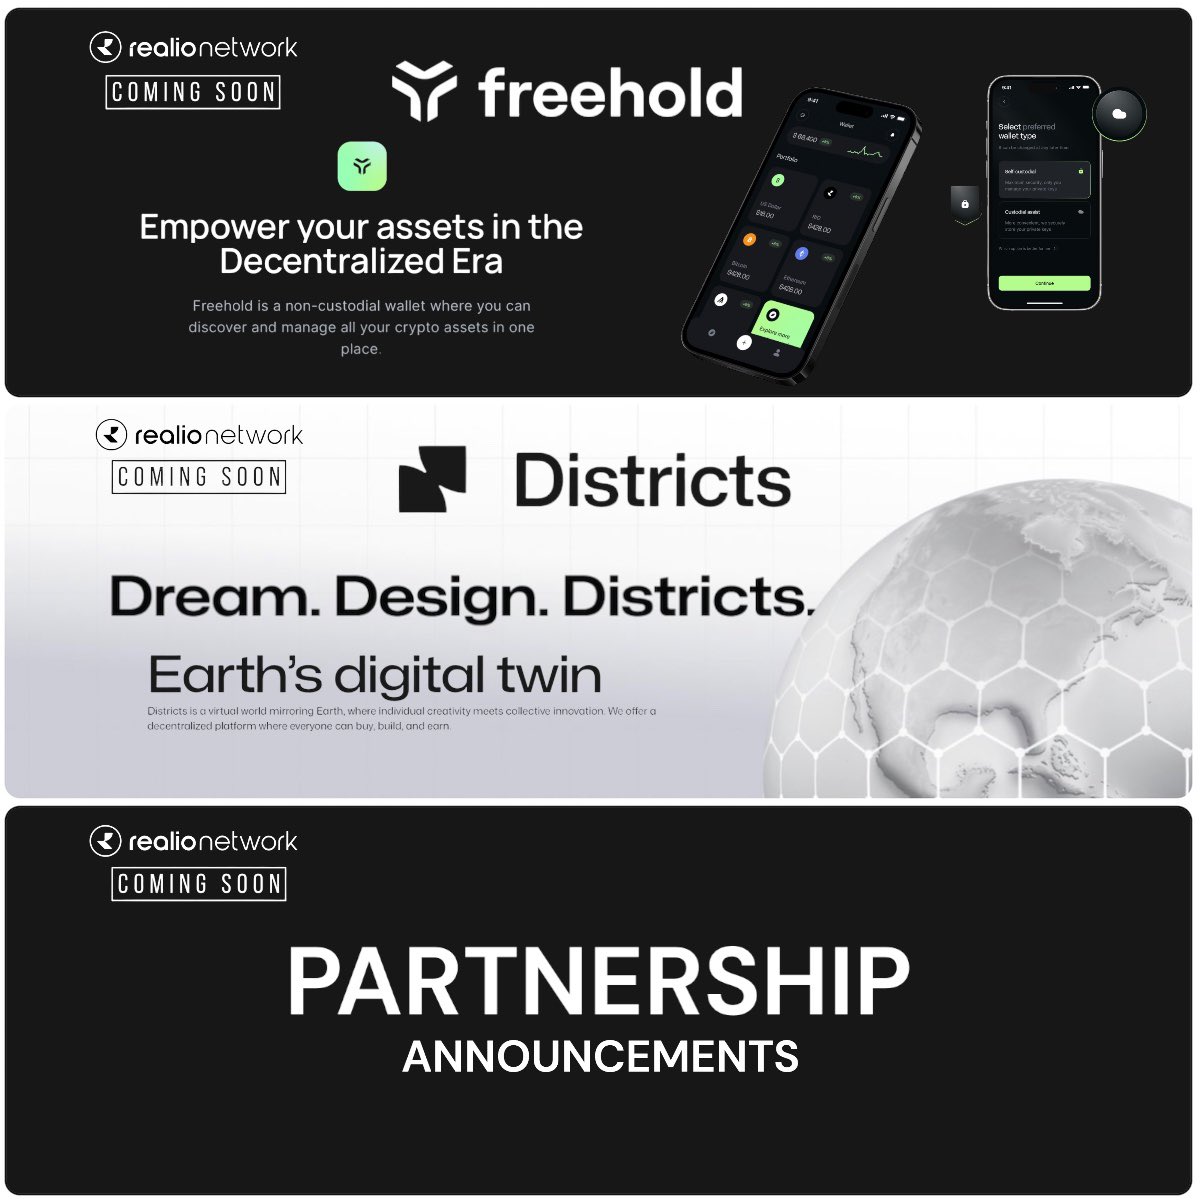 @realio_network will soon be launching @freehold_wallet and @districts_xyz alongside incredible partners ▪️Districts - is built on #Realio's #L1 #BLOCKCHAIN infrastructure. Earth’s digital twin > #Districts is a virtual world mirroring Earth, where individual creativity meets…